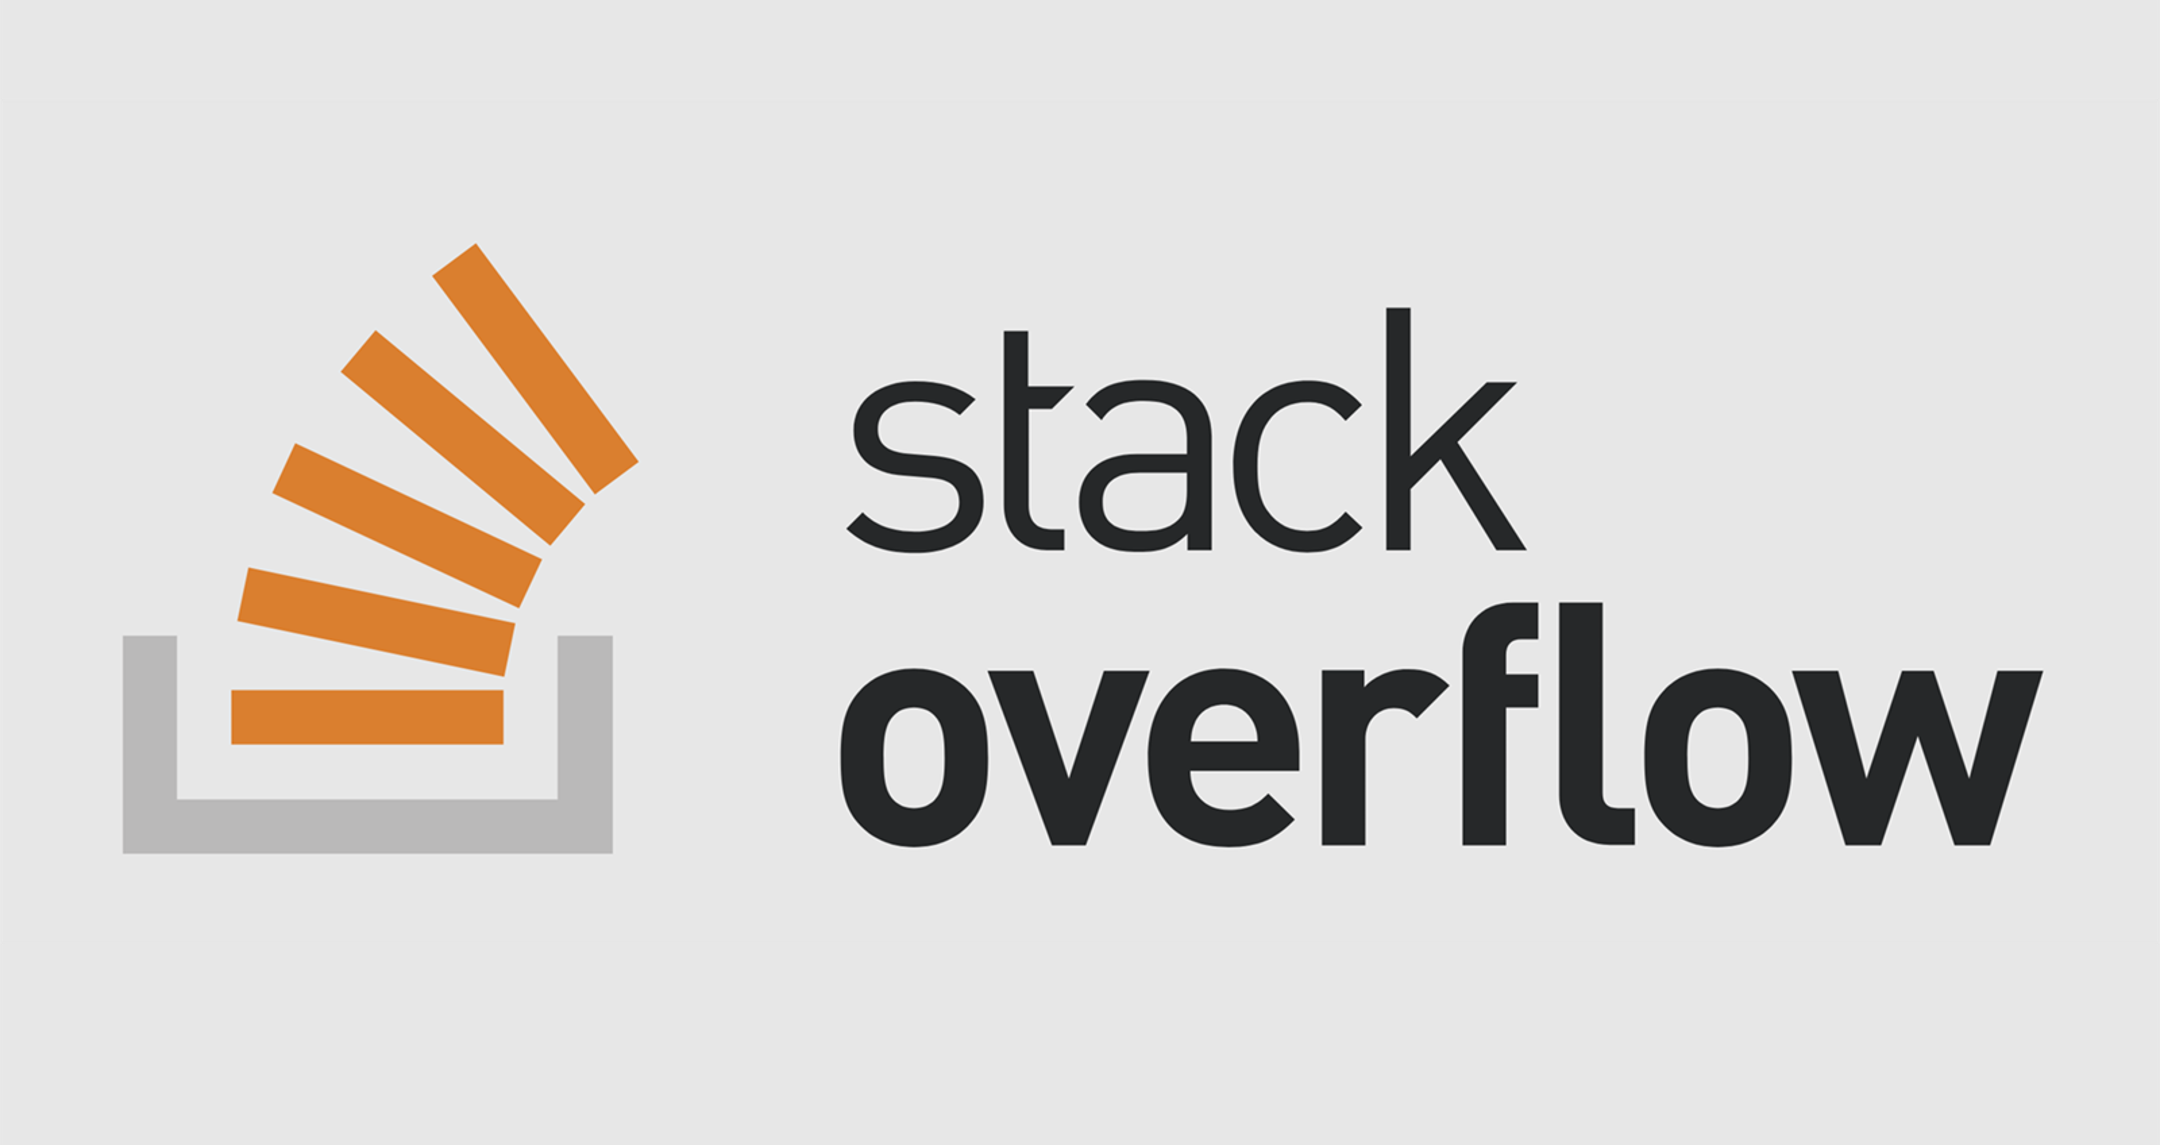 Stack Overflow data science community